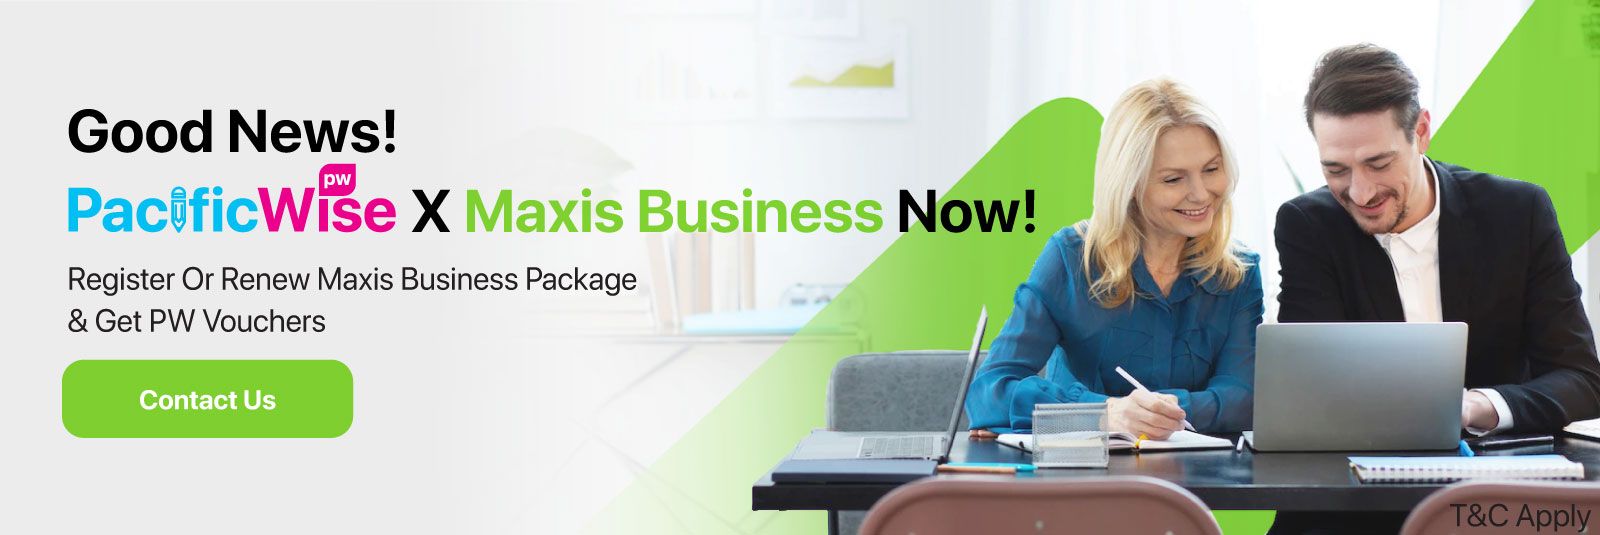 Maxis Business